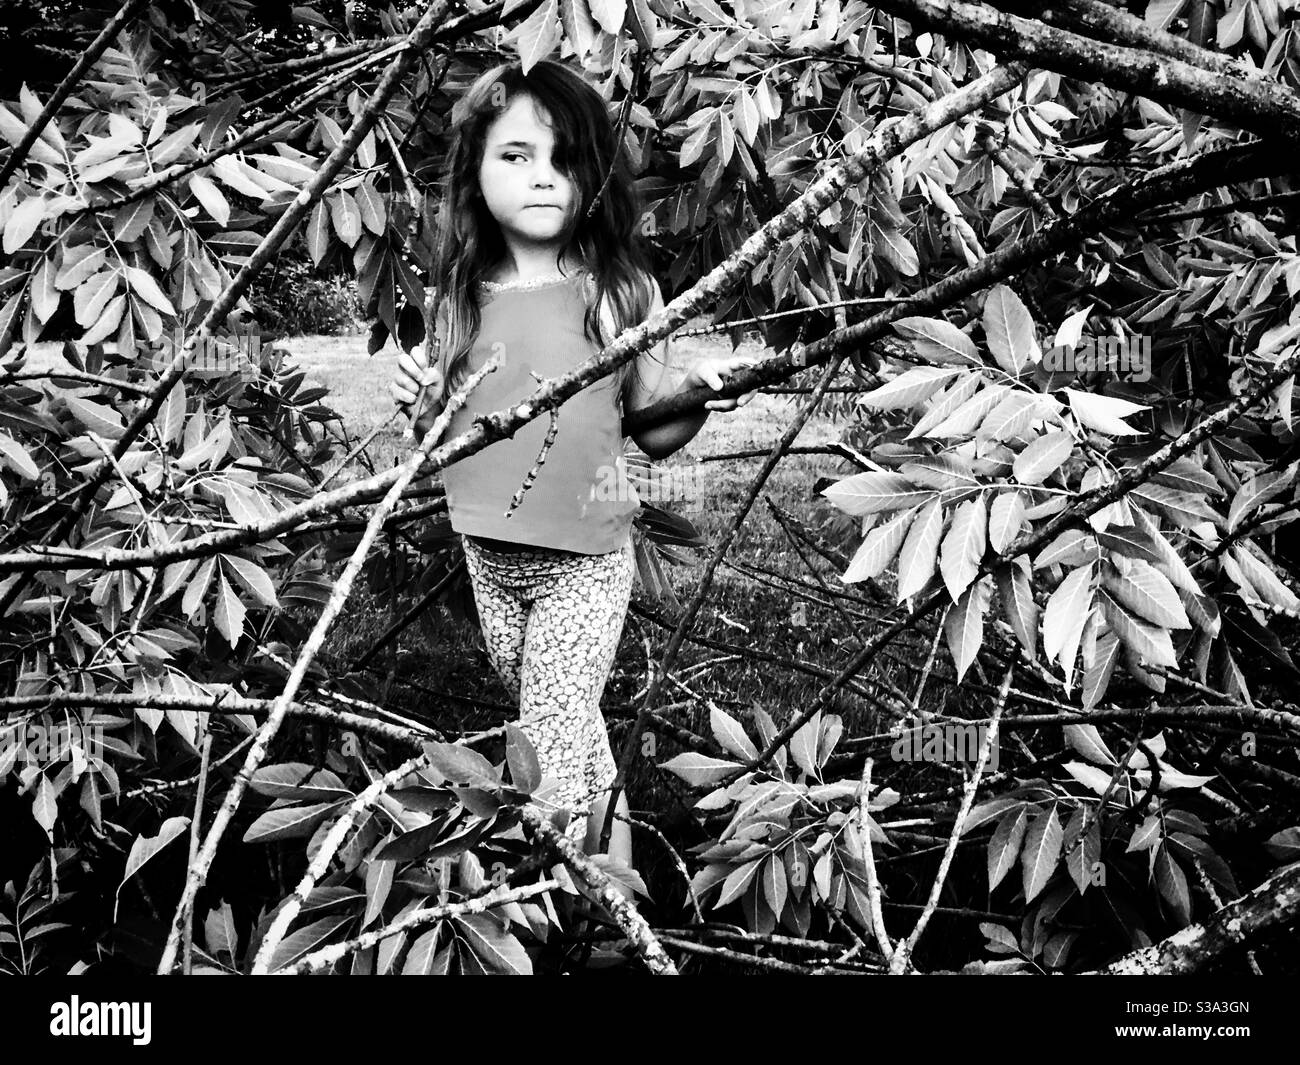 Young girl standing alone in tree branches Stock Photo